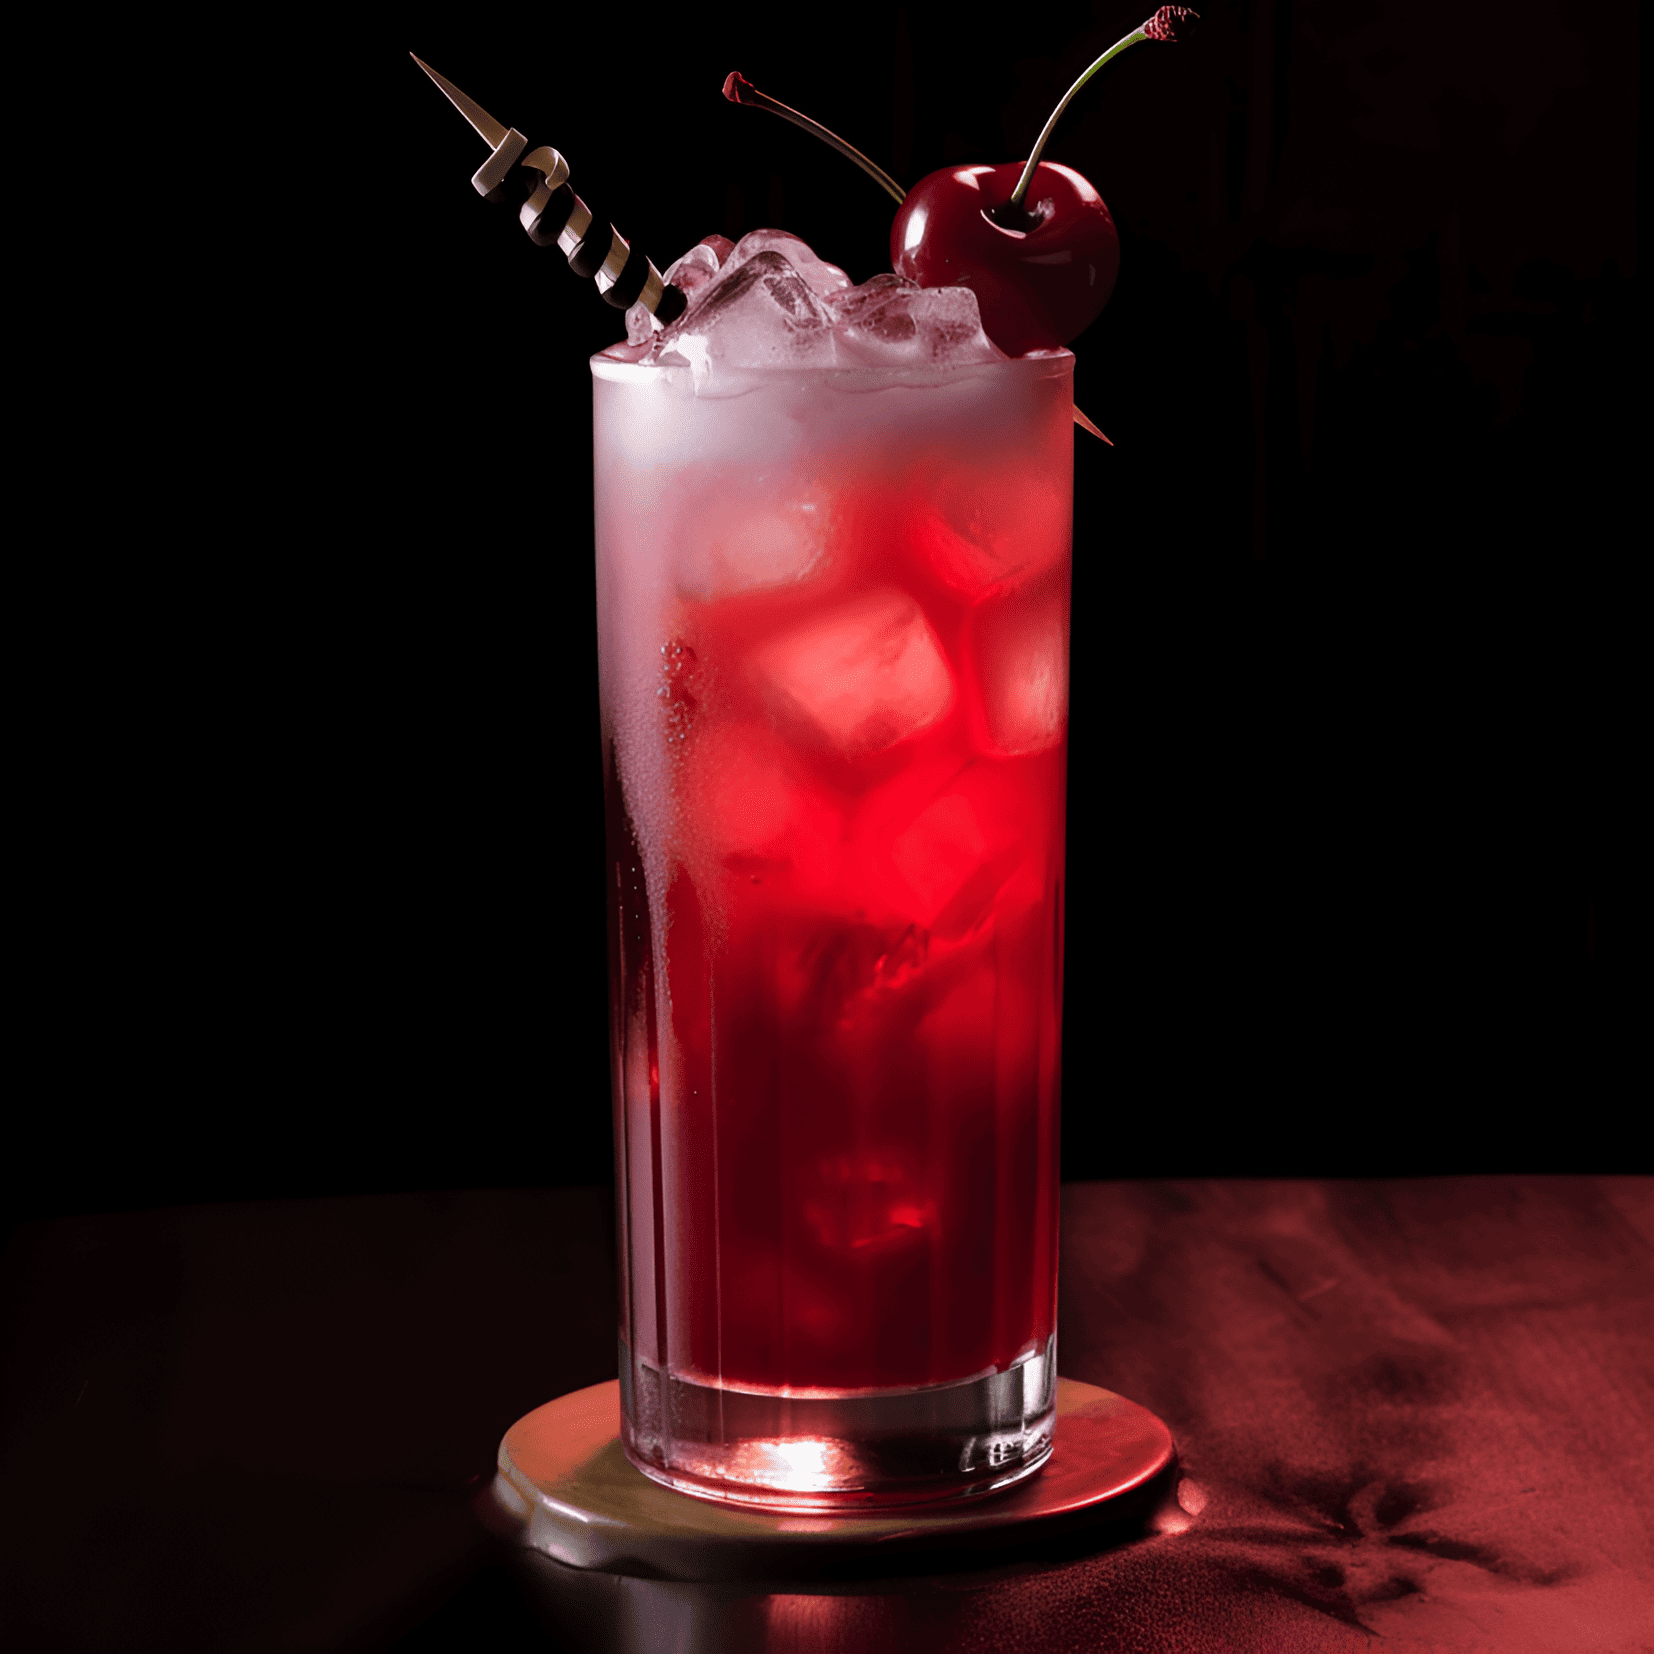 Voodoo Child Cocktail Recipe - The Voodoo Child cocktail is a harmonious blend of sweet, sour, and fruity flavors. The tangy notes of lime and pineapple are balanced by the sweetness of grenadine and the richness of rum, creating a vibrant and refreshing taste. The cocktail is medium-bodied, with a smooth and velvety texture.